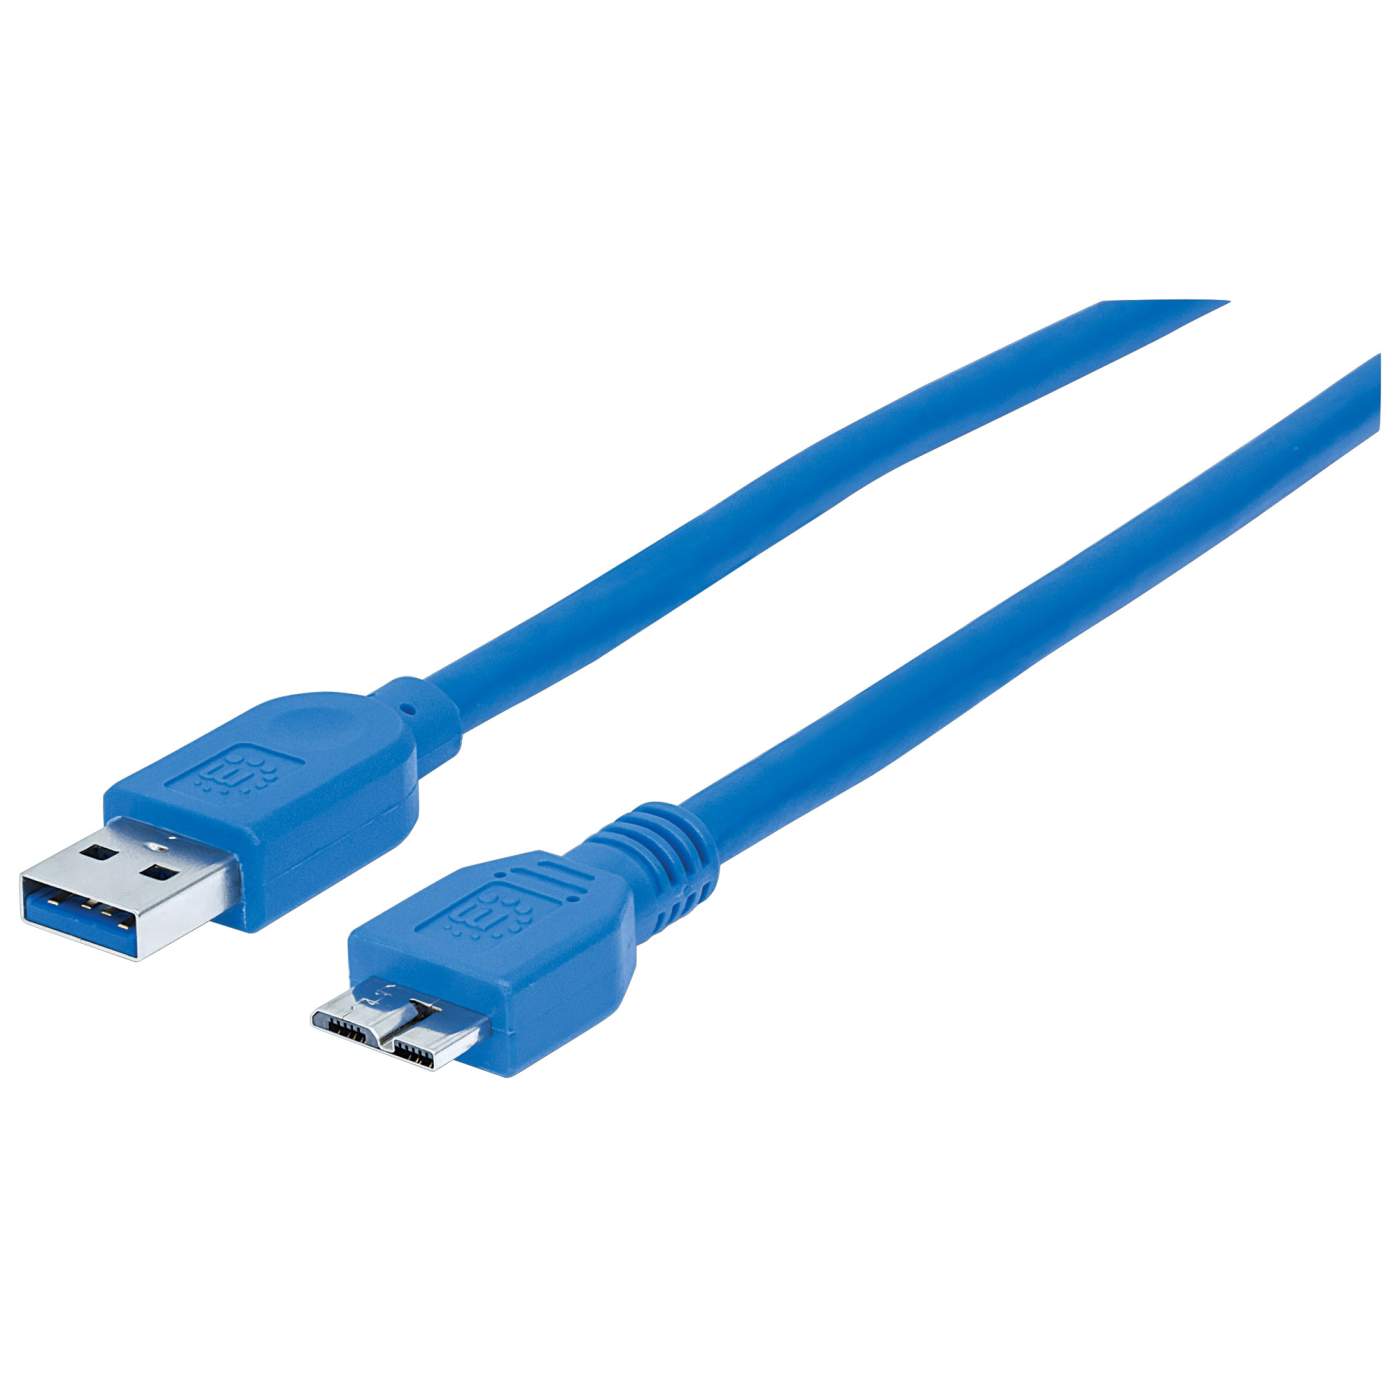 USB 3.0 Type-A to Micro-USB Cable Image 1